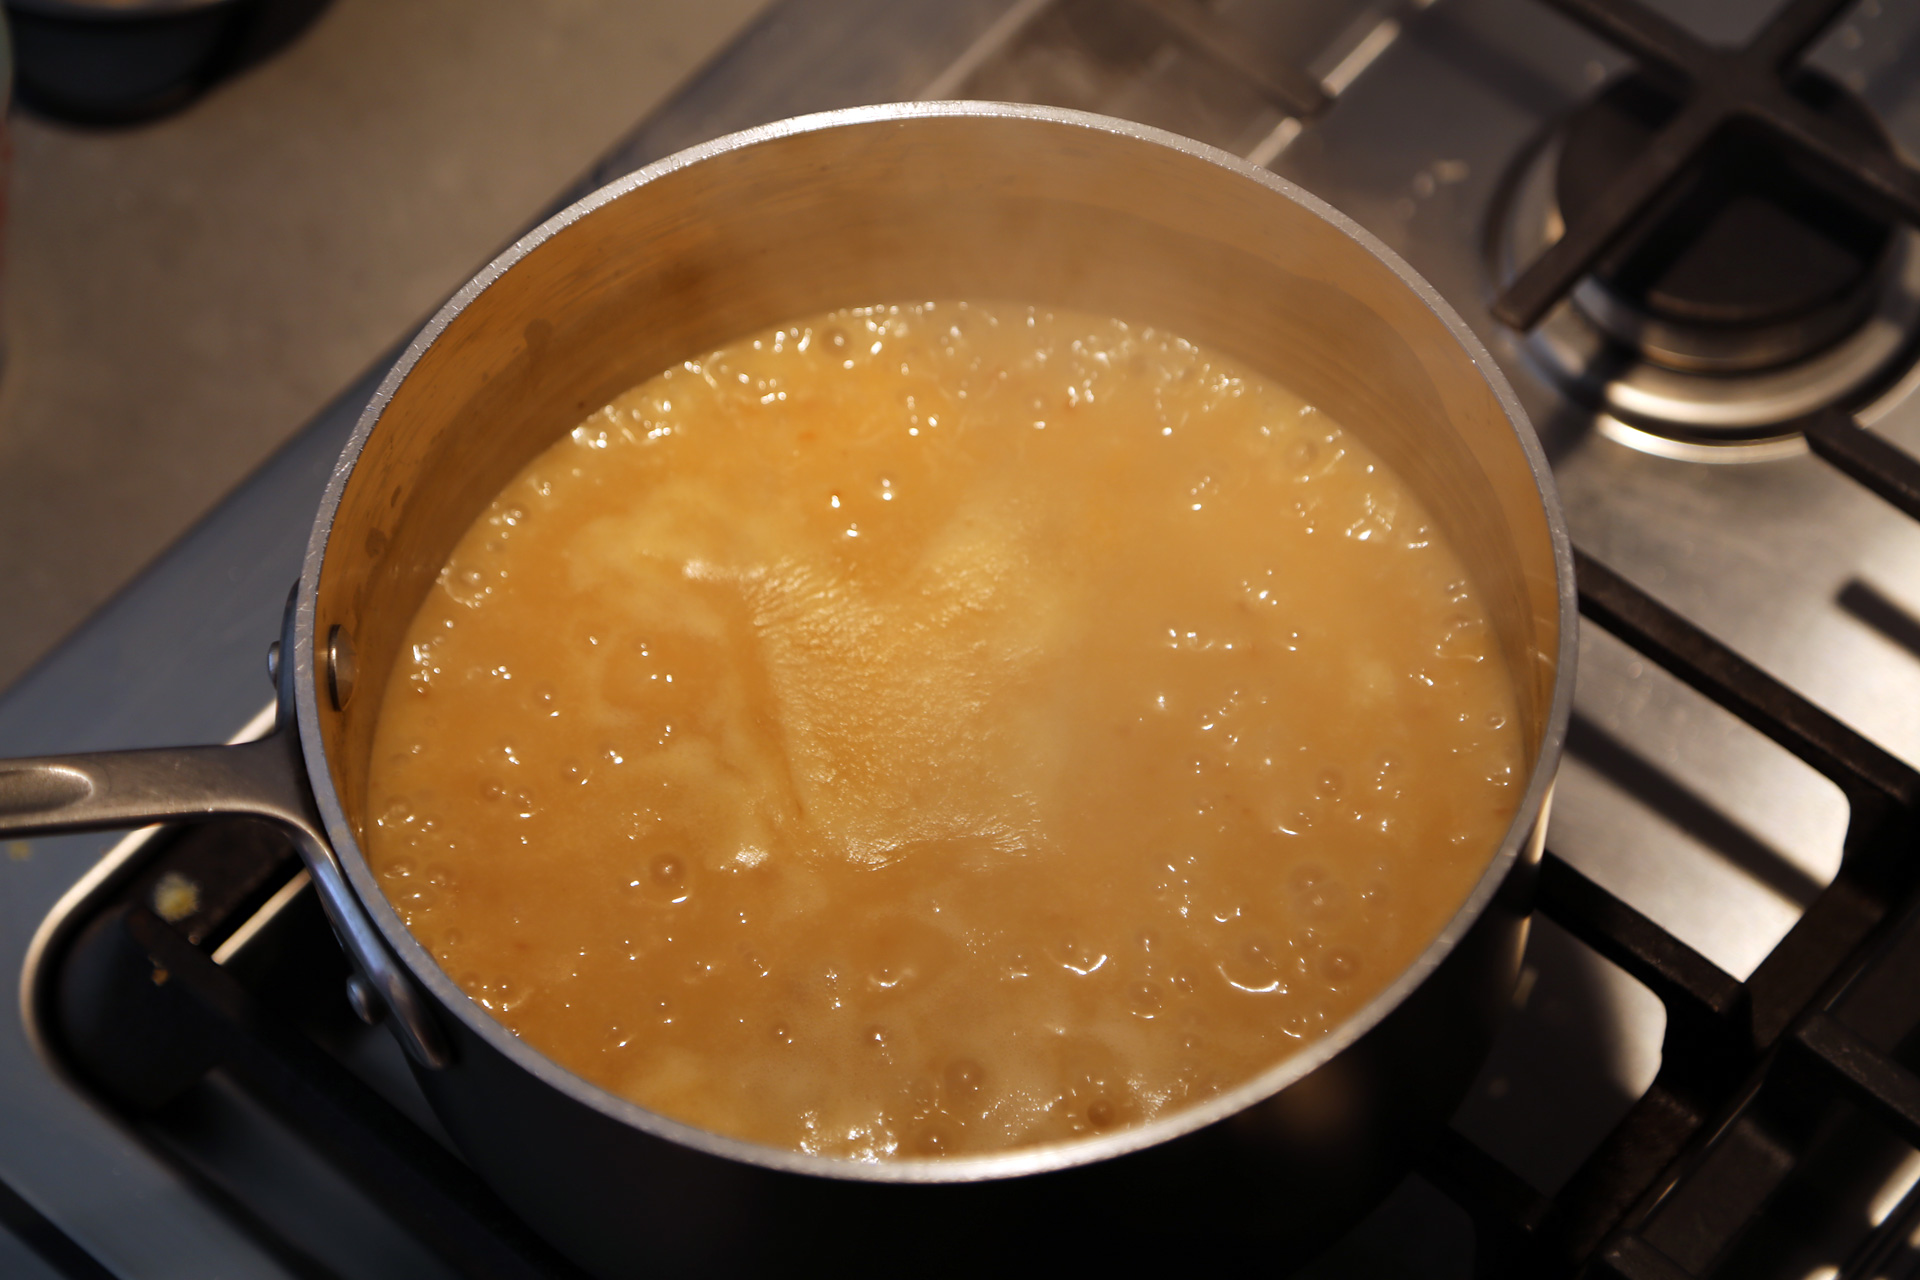 Bring to a boil, reduce the heat slightly, and let simmer for a few minutes to thicken slightly.